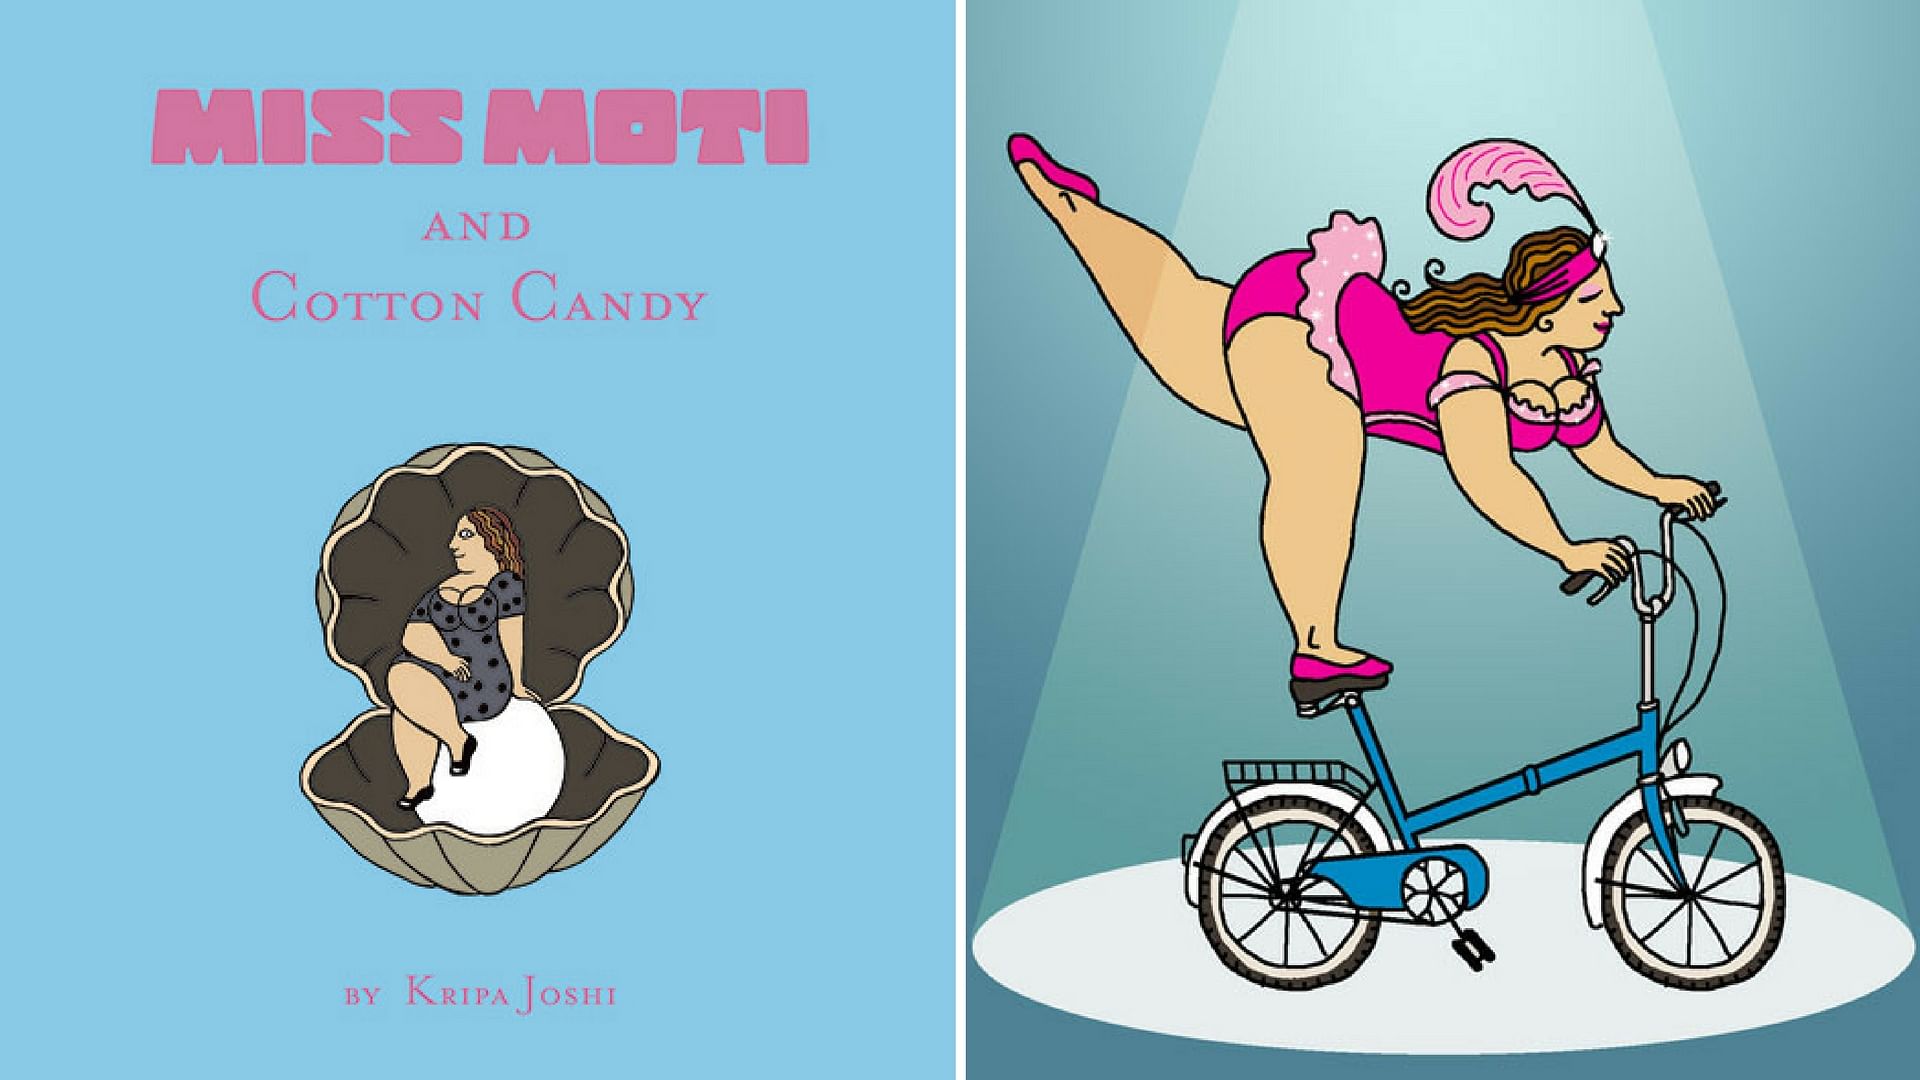 

Kripa Joshi’s comic character ‘Miss Moti’  promotes self-acceptance and breaks stereotypes. (Photo Courtesy: <a href="http://www.missmoti.com/">Miss Moti Website</a>)